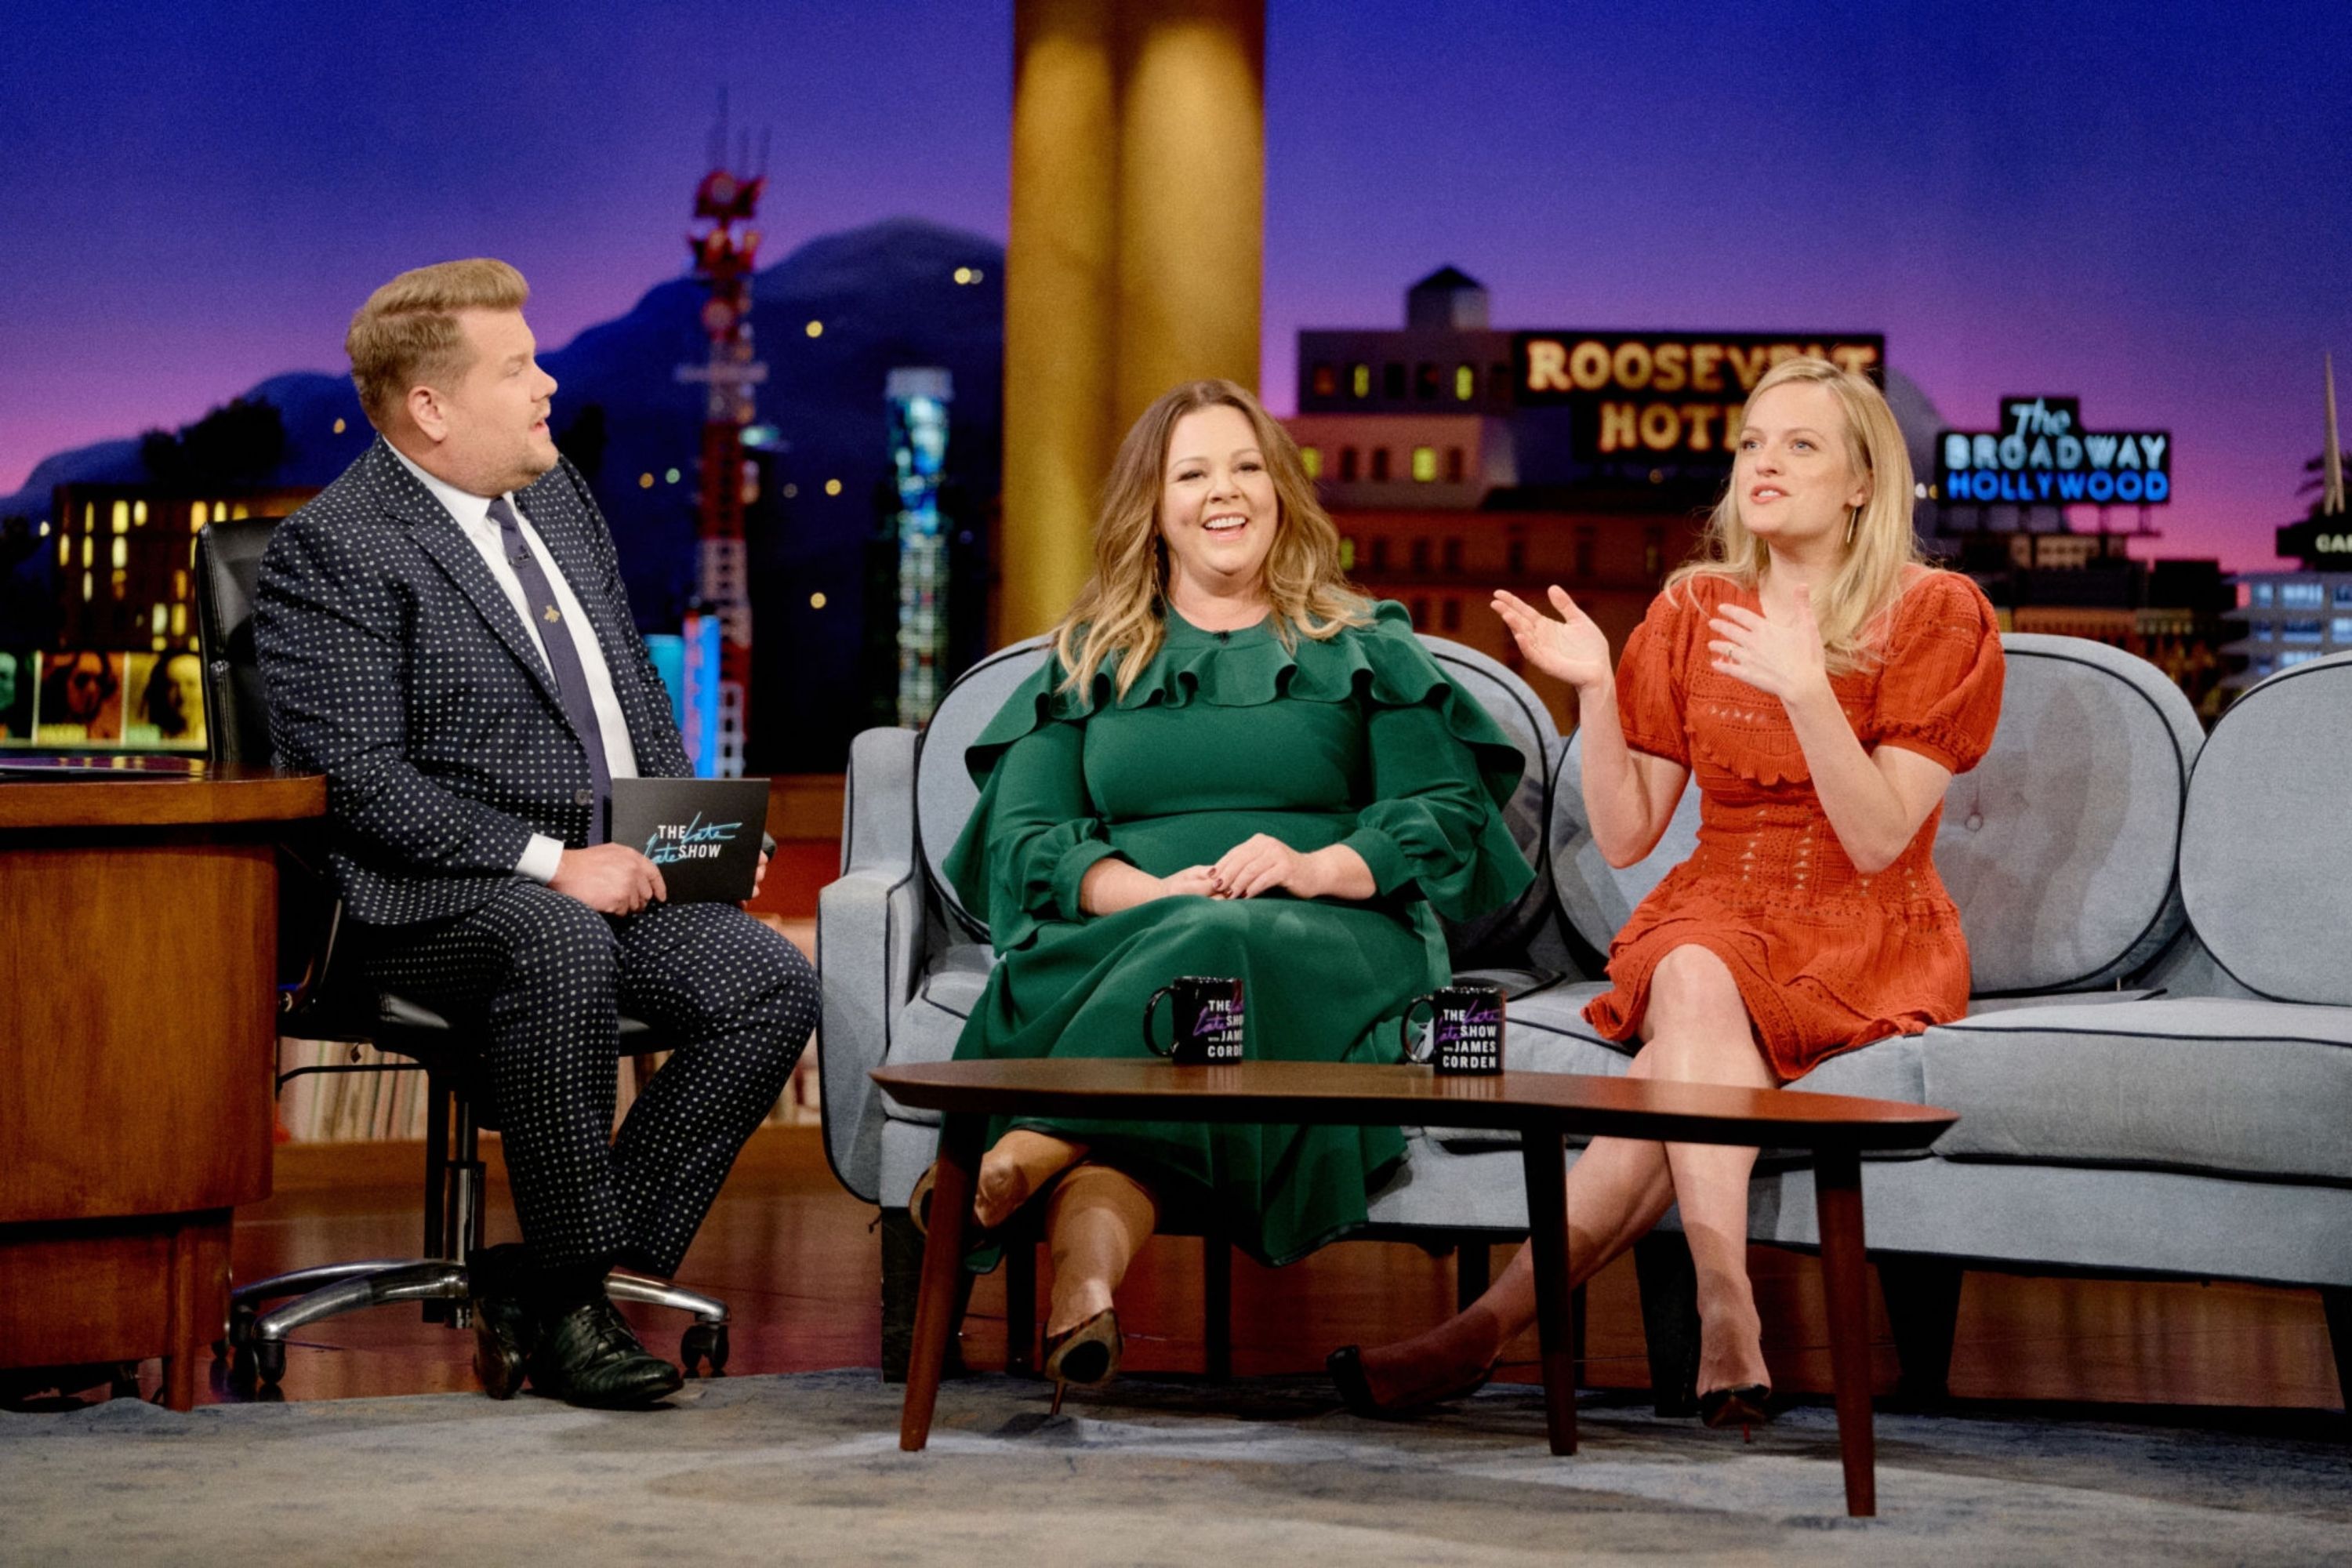 August 6th The Late Late Show With James Corden Stills 2019 08 06 The Late Late Show With